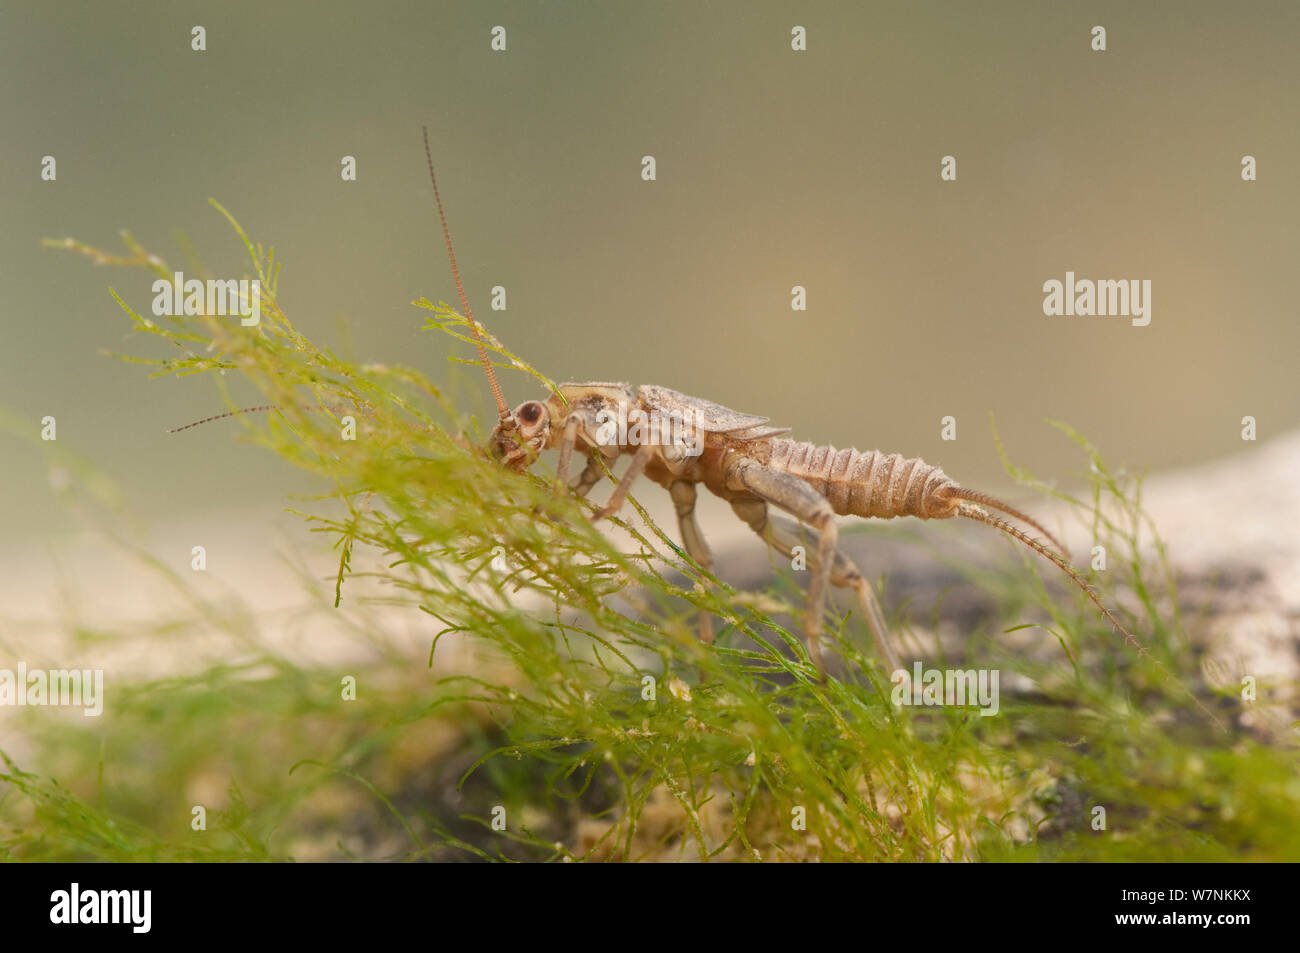 Stonefly nymph (Plecoptera), grazing algae, Europe, April, controlled conditions Stock Photo